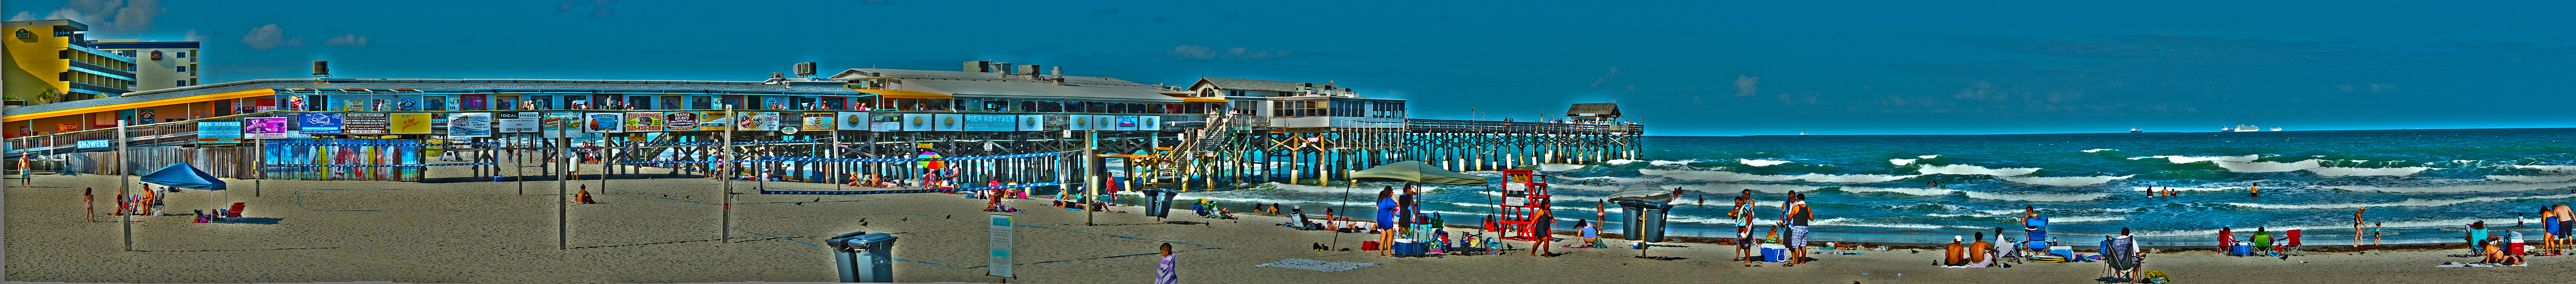 HDR Toned Panoramic of Cocoa Beach Pier